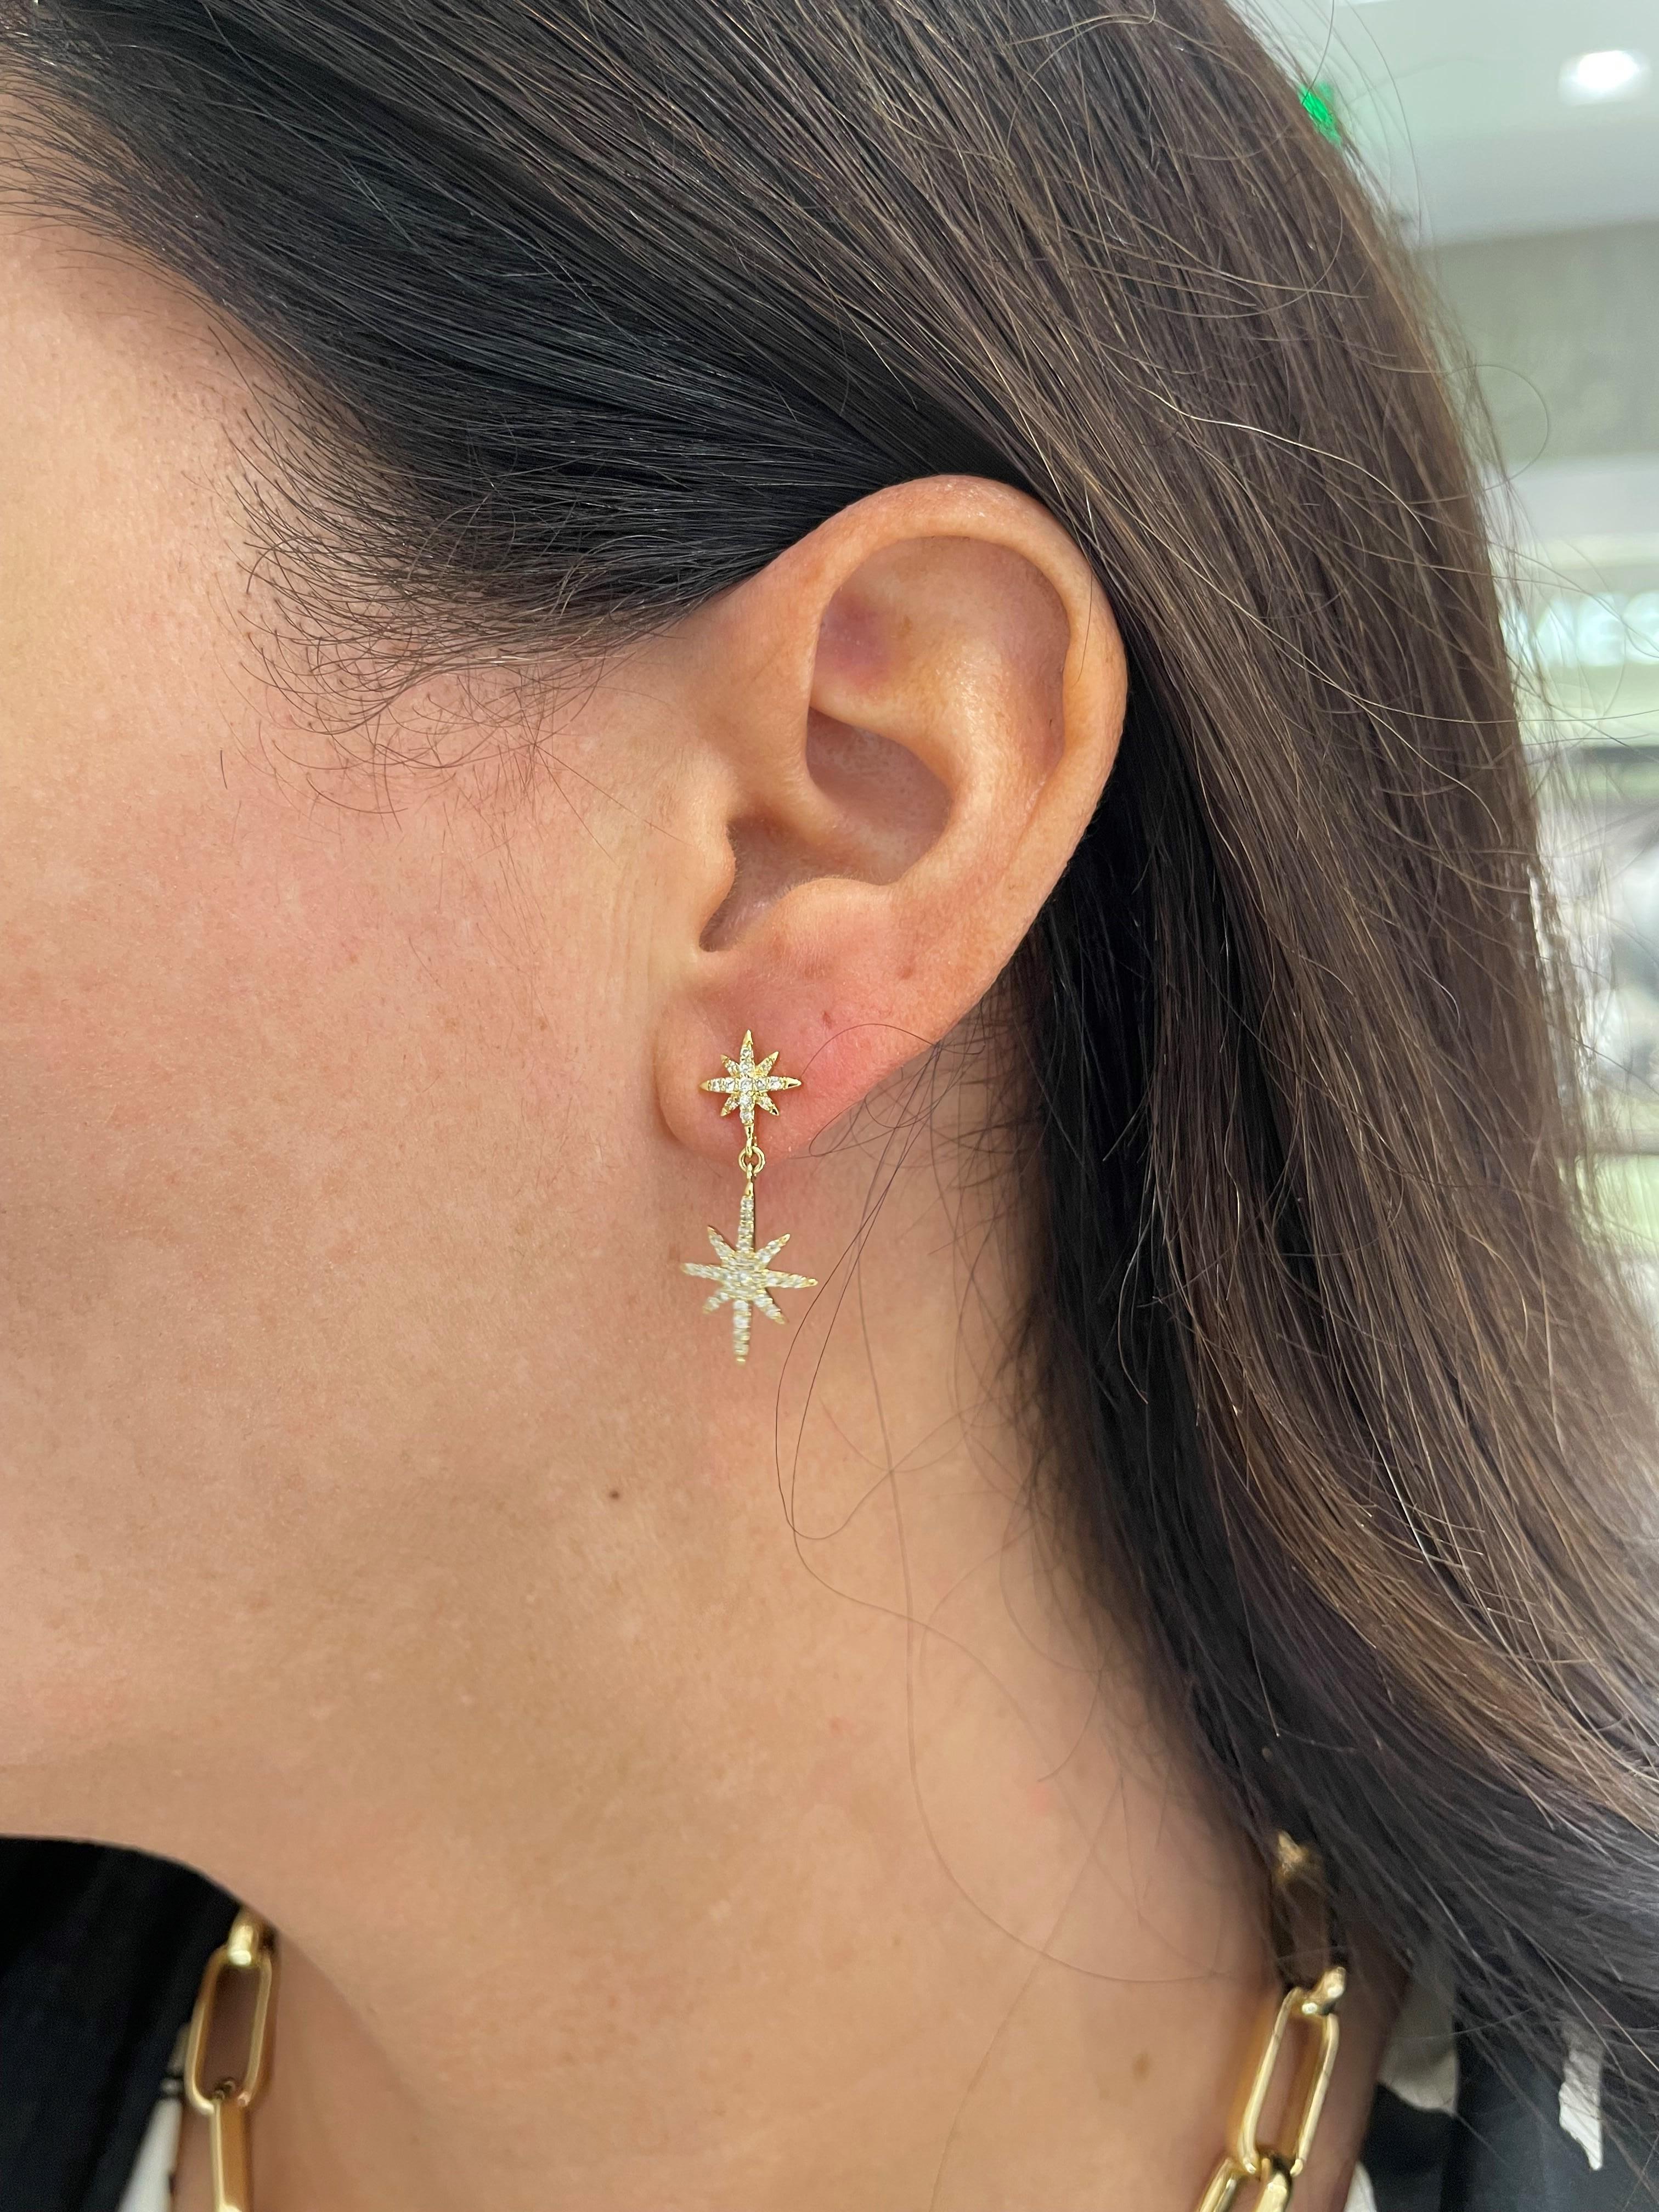 From the Eiseman Collection, 18 karat yellow gold 8 point star drop earrings featuring pave set round brilliant cut diamonds with a combined weight of 0.50 carats. These earrings feature a post and friction back closure and a polished finish.
